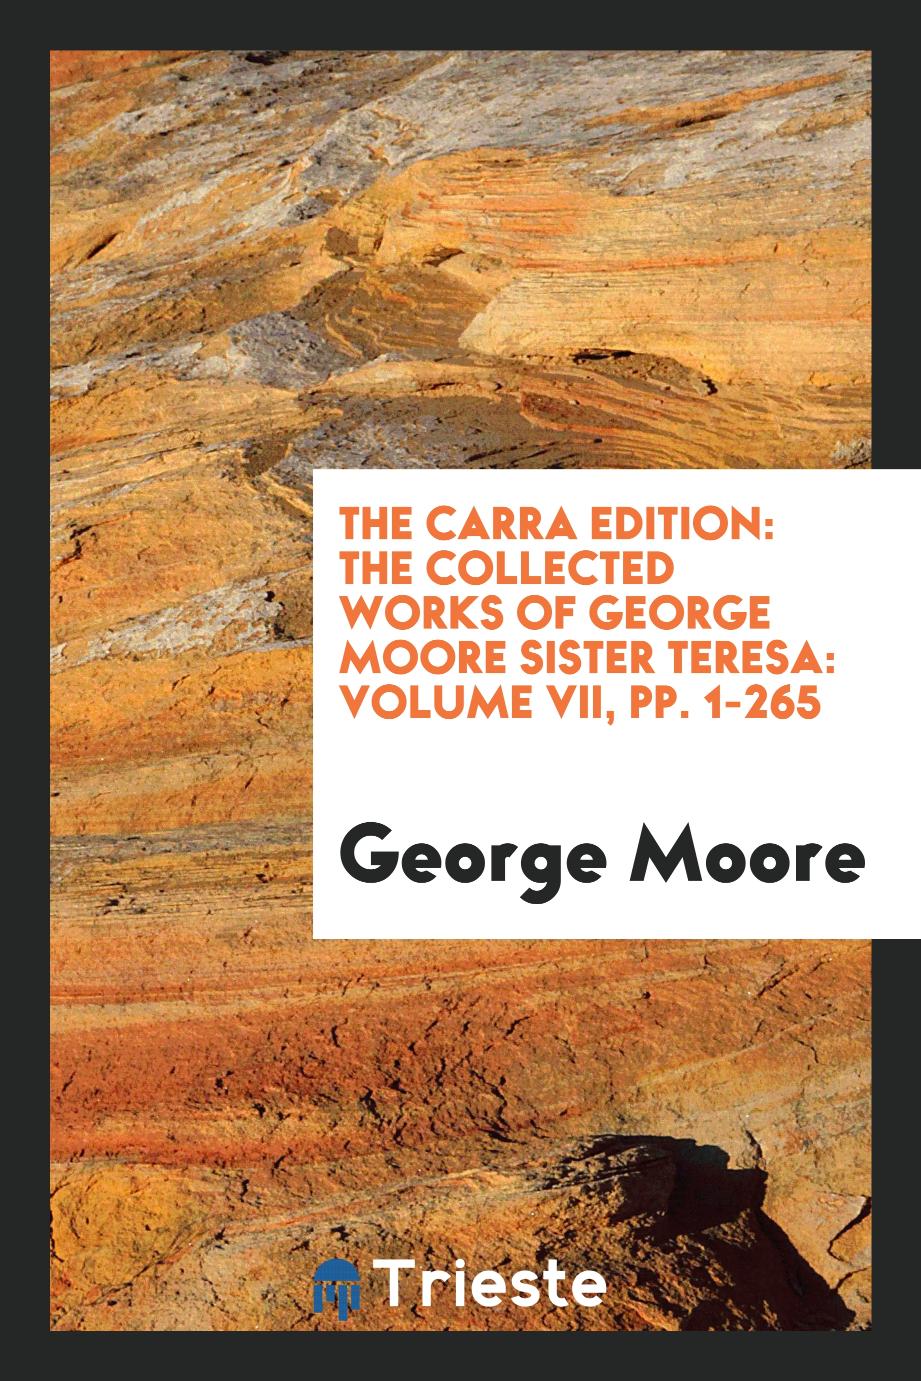 The Carra Edition: The Collected Works of George Moore Sister Teresa: Volume VII, pp. 1-265